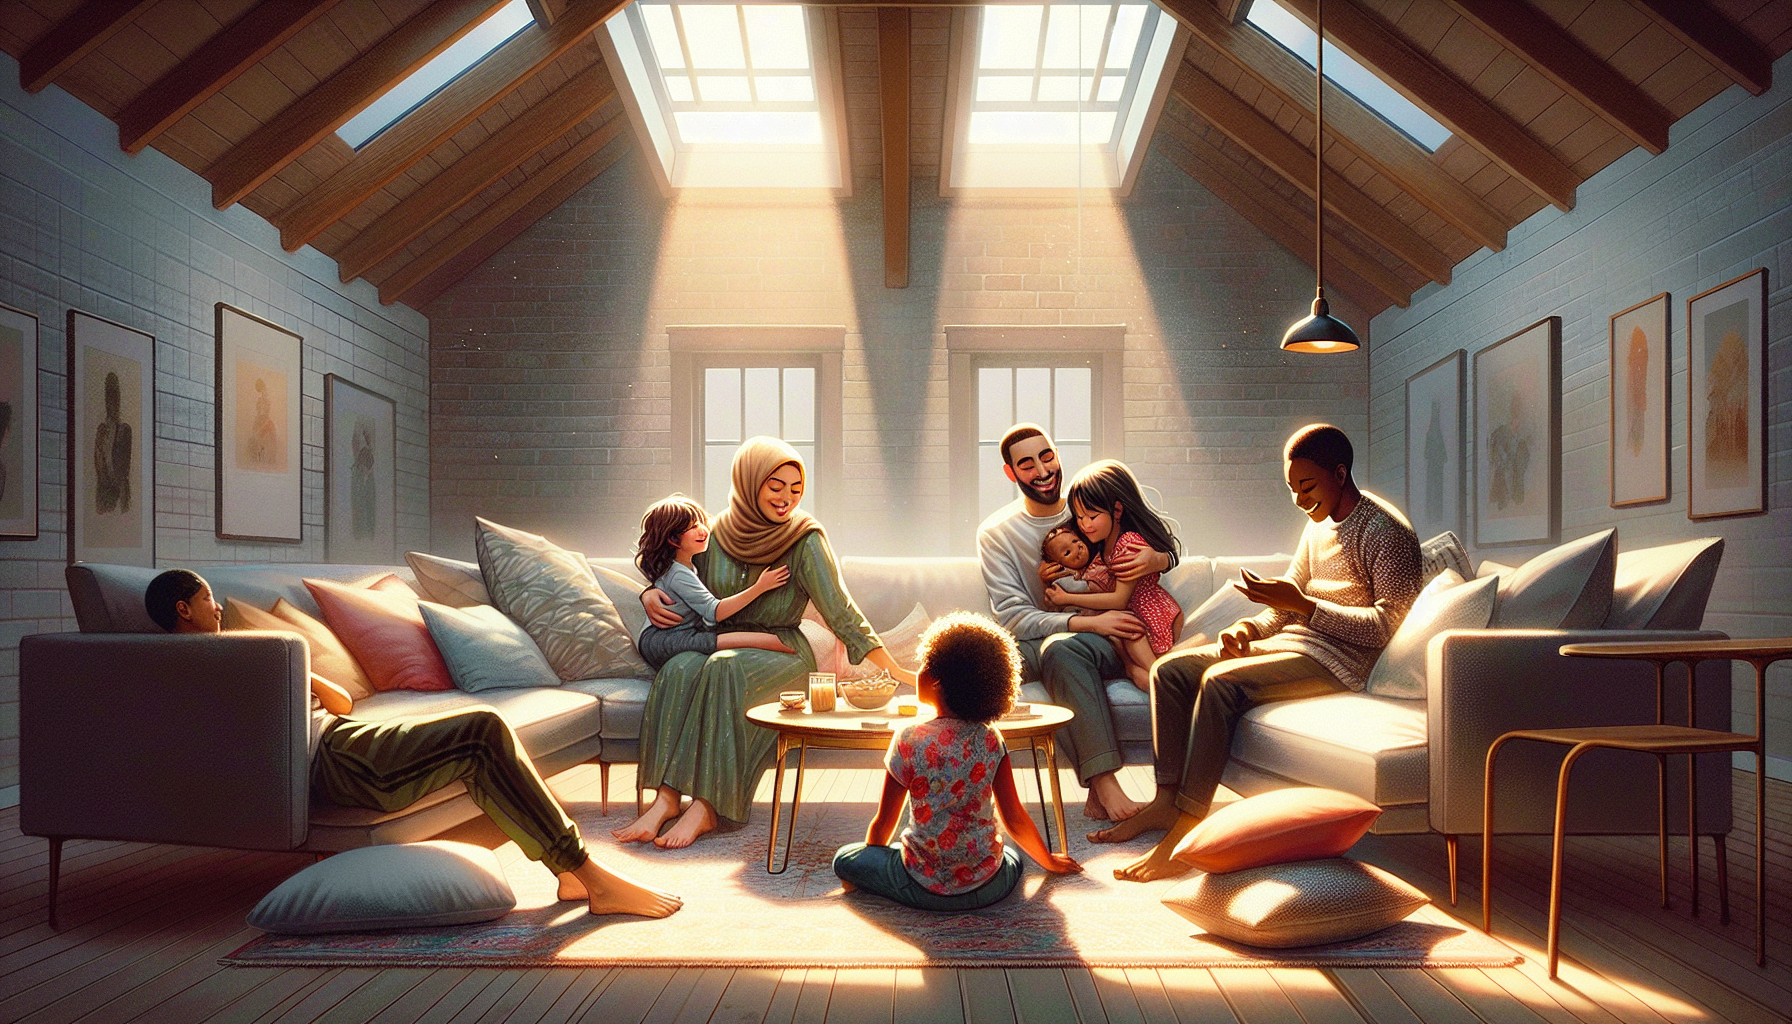 Illustration of a family enjoying the additional living space created by a loft extension